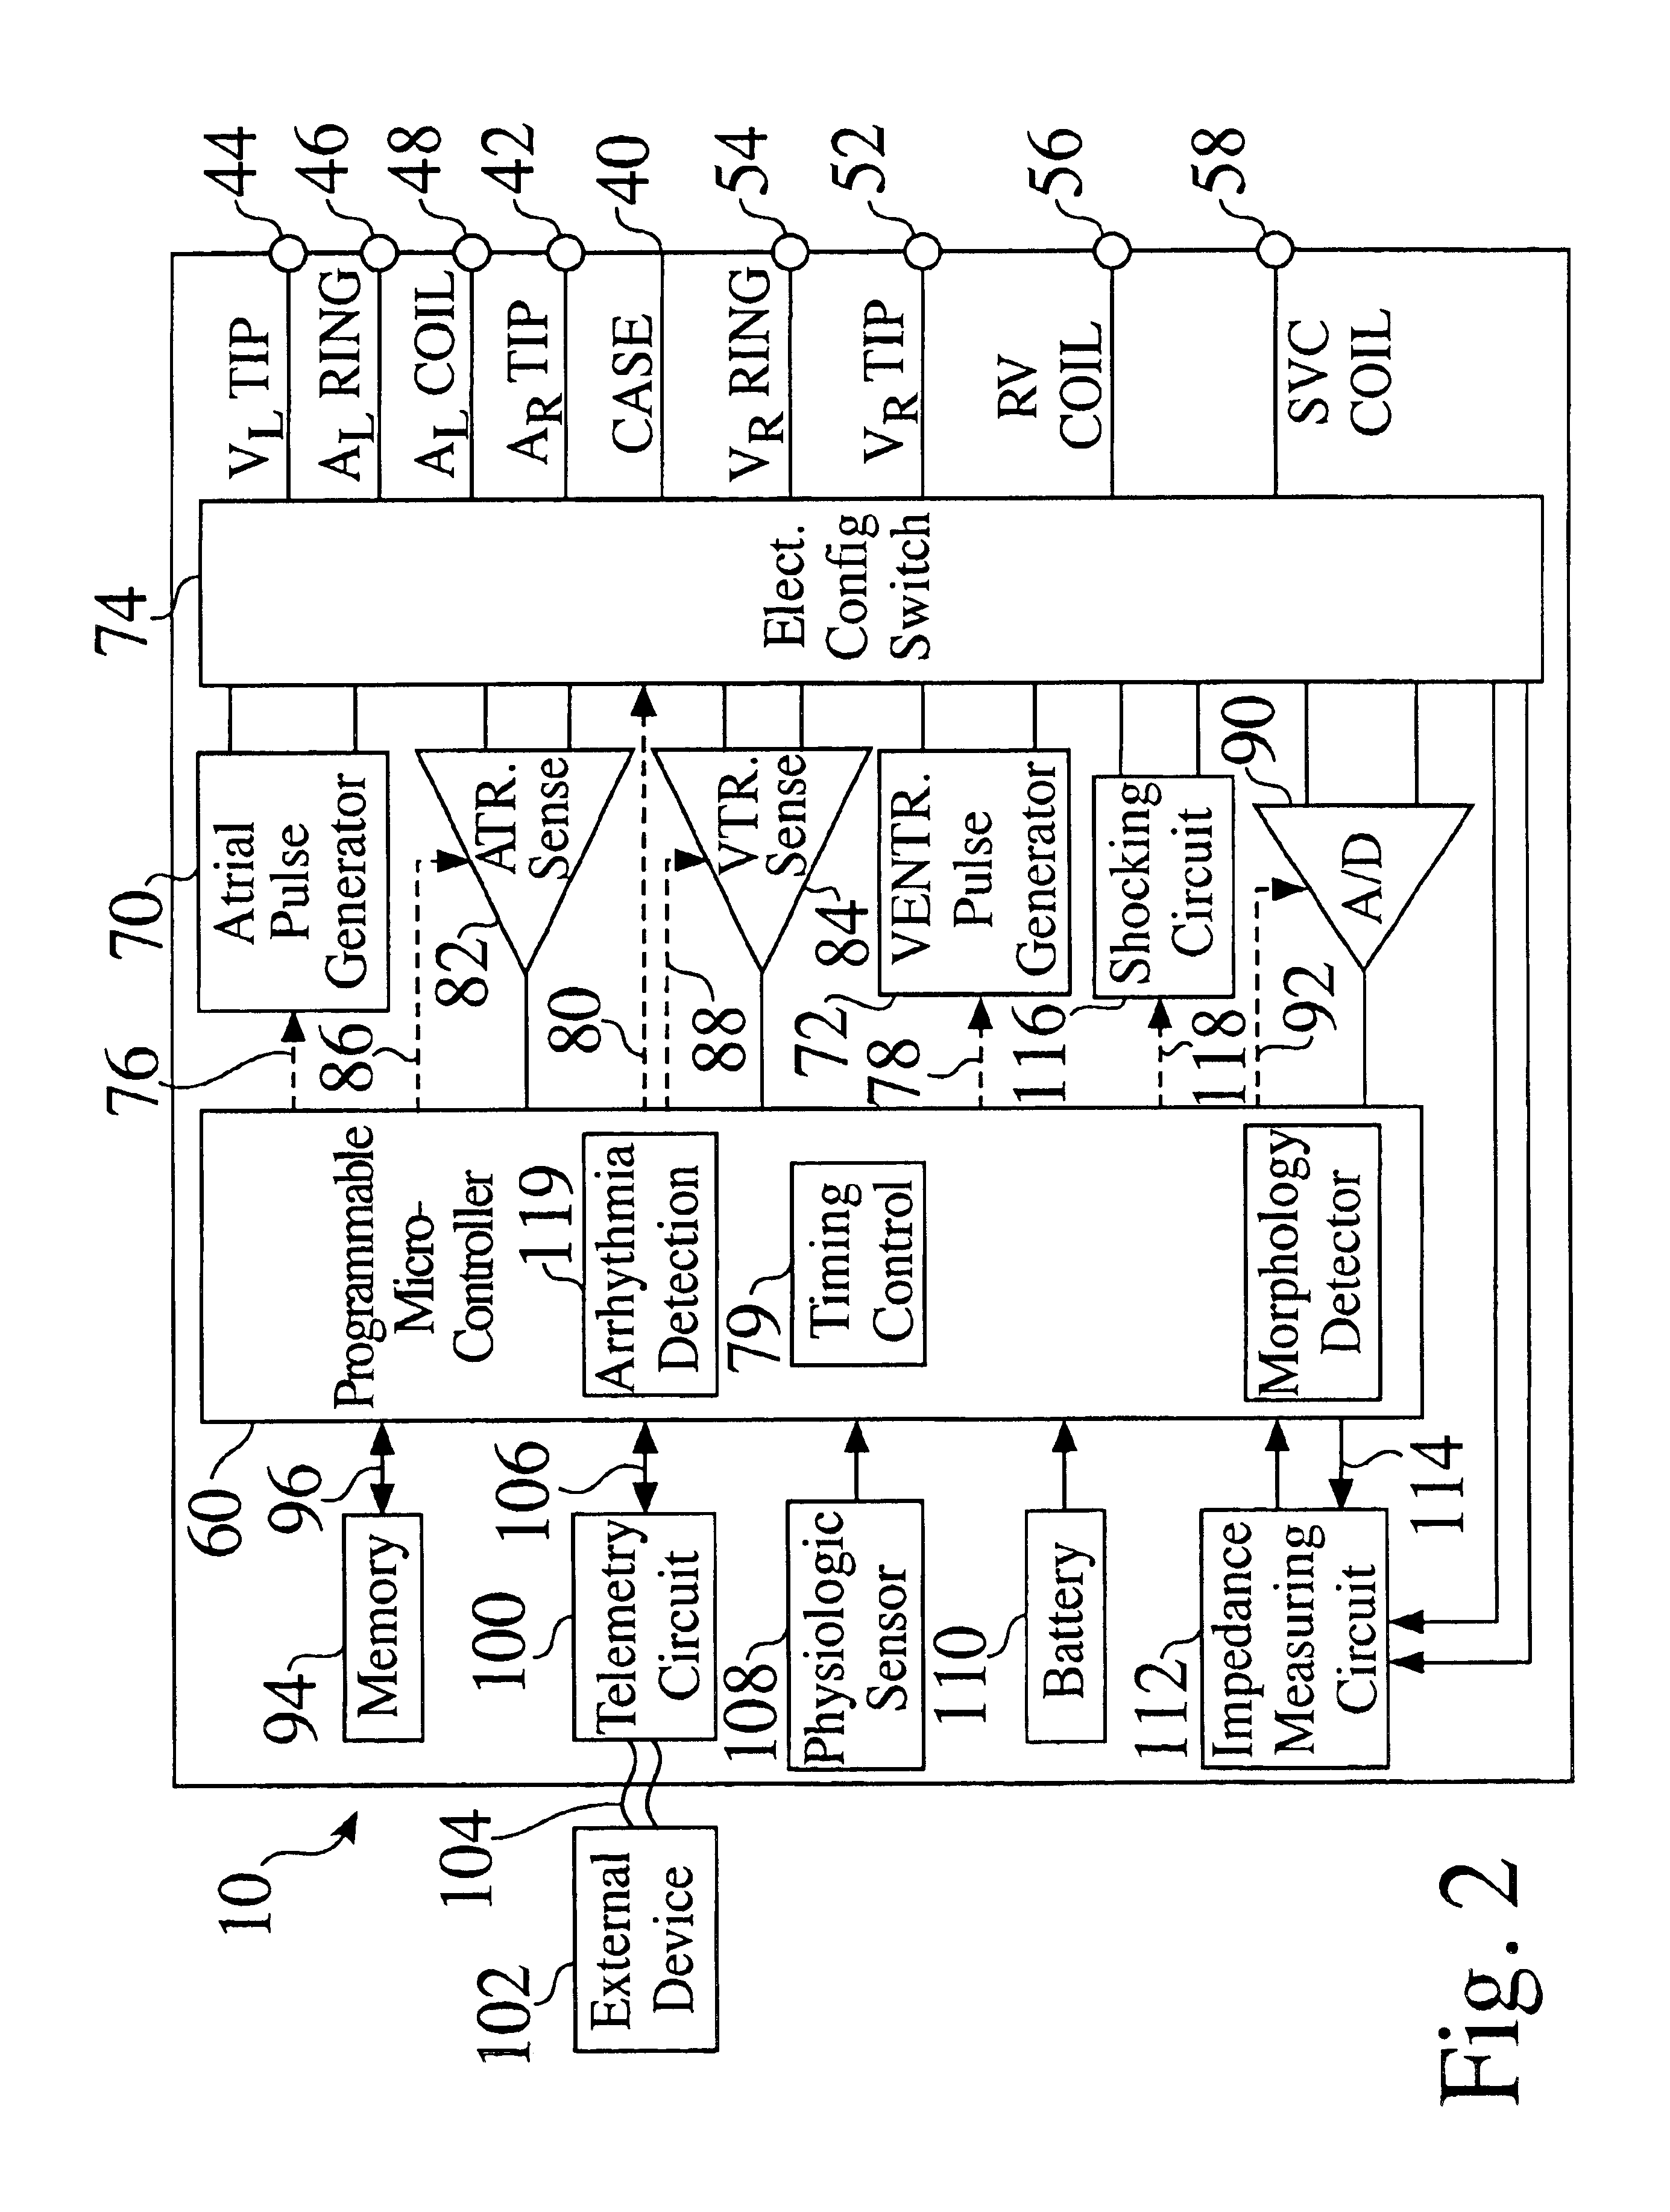 Methods and devices for inhibiting battery voltage delays in an implantable cardiac device